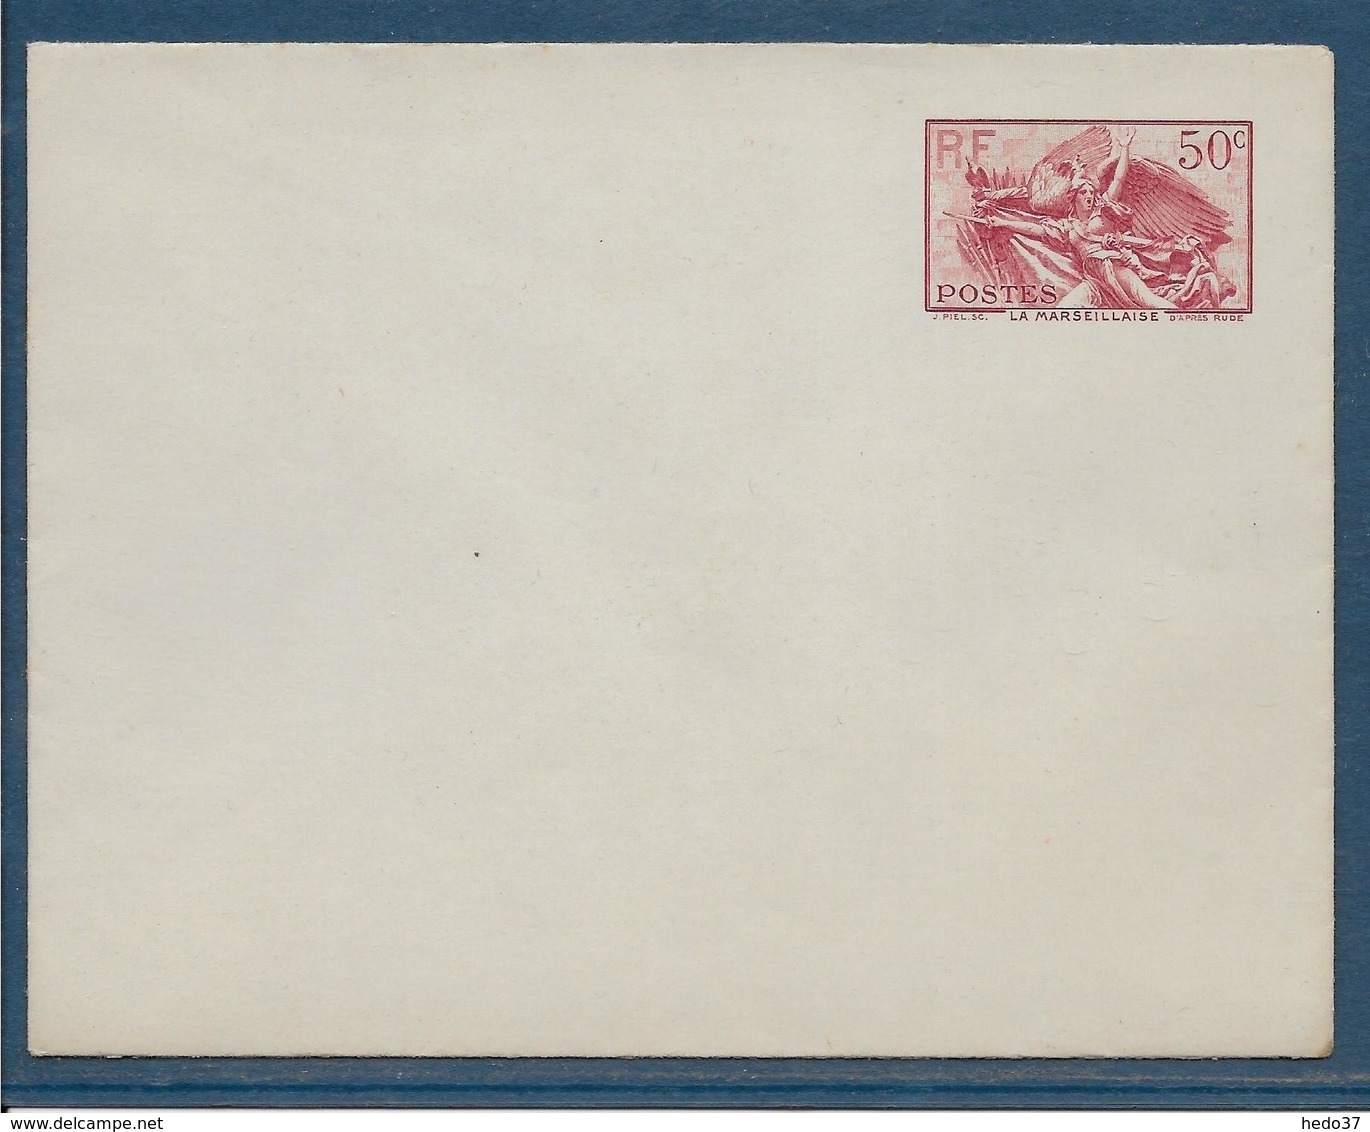 France Entiers Postaux - 50 C La Marseillaise - Storch N°W3a Papier Soie Gris - Neuf ** - TB - Standard Covers & Stamped On Demand (before 1995)